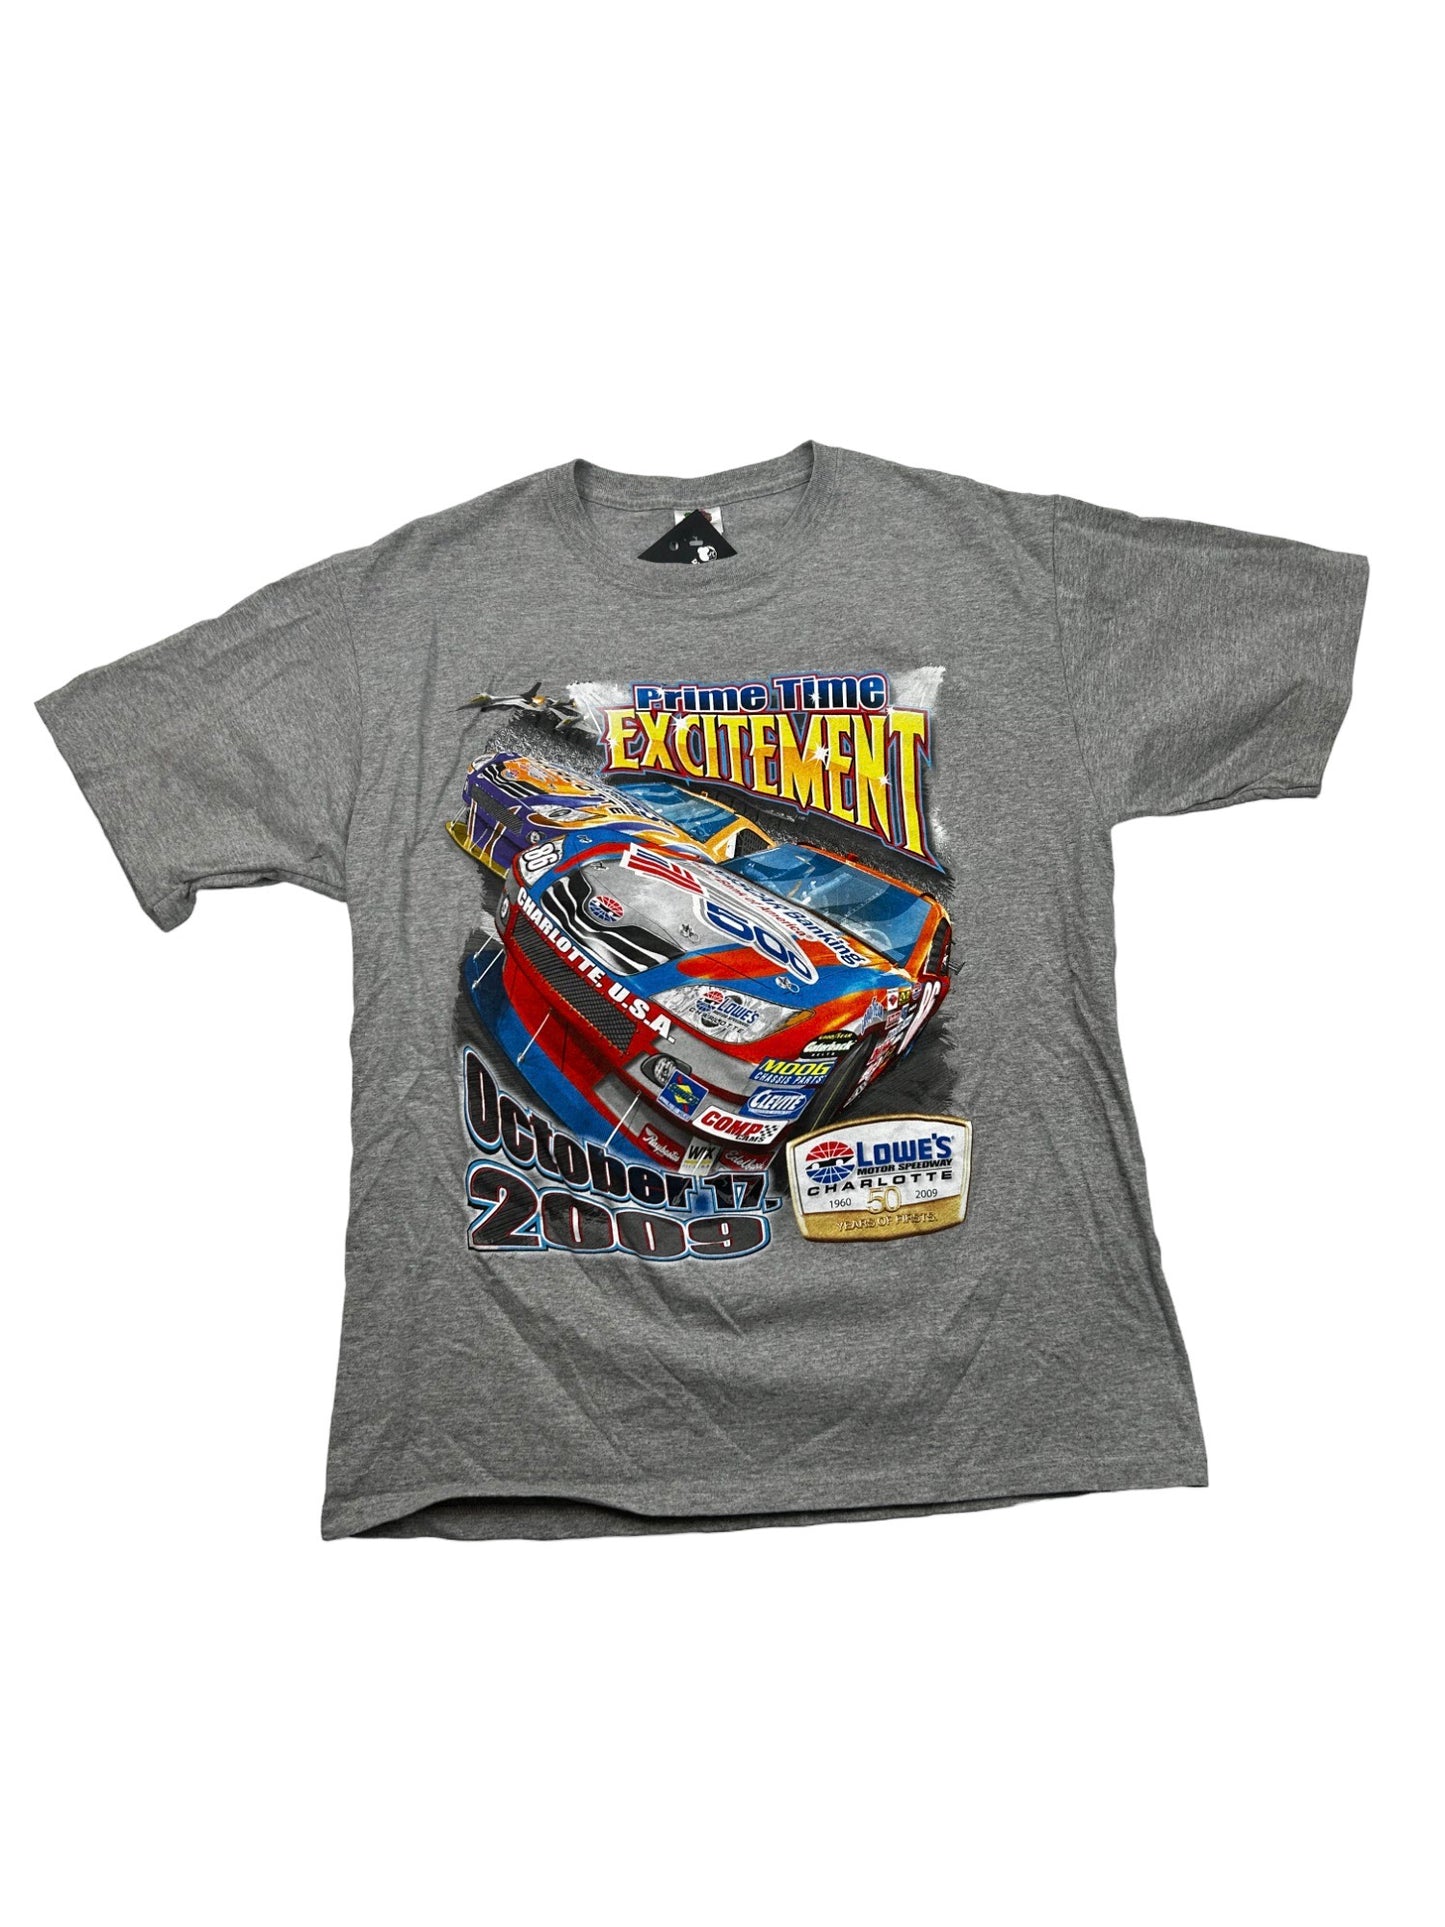 Prime Time Excitement T-Shirt